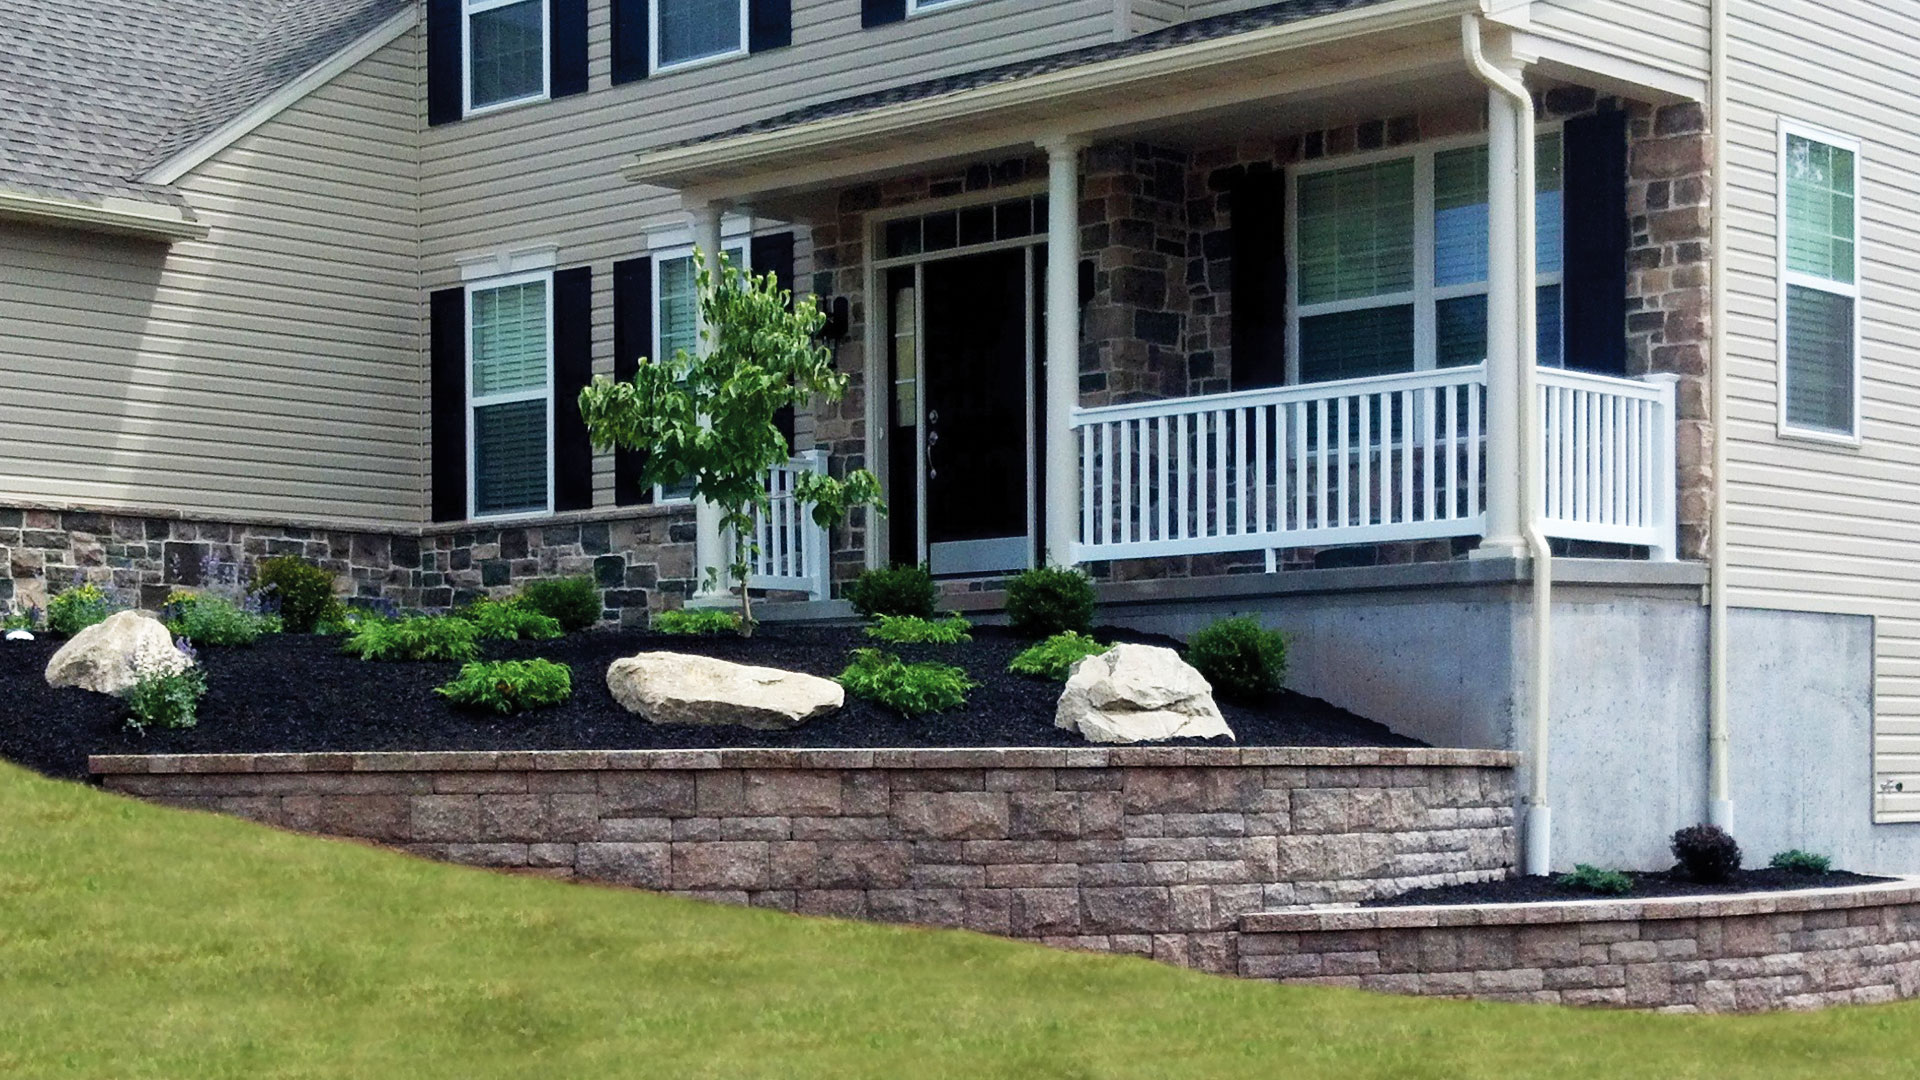 Planting with boulders, plants and retaining wall